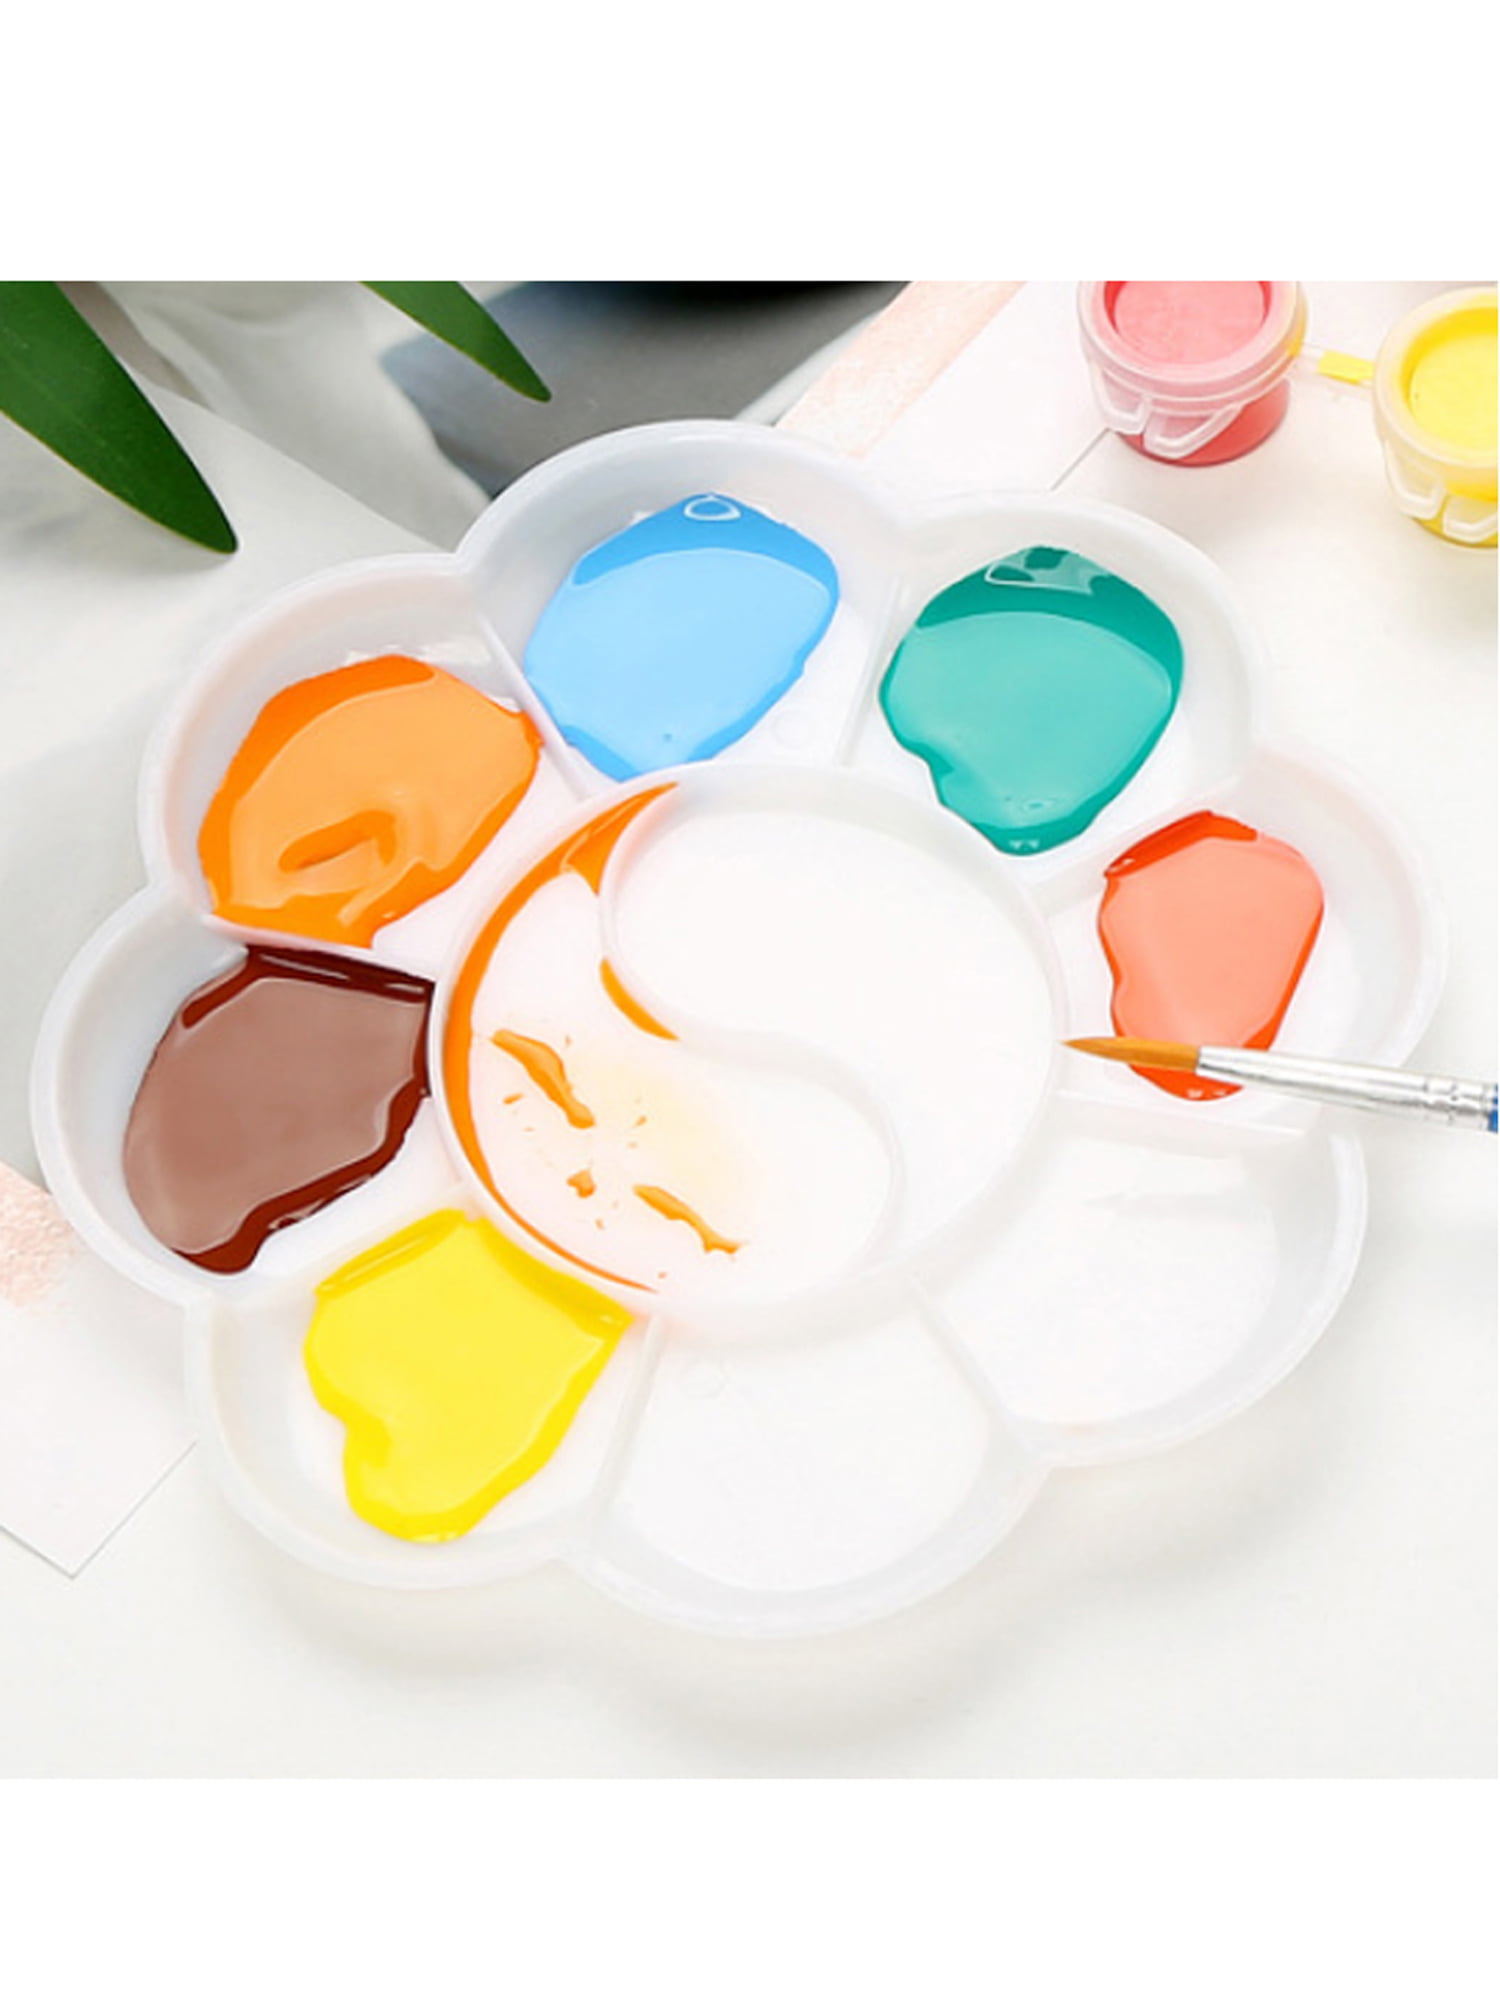 Professional Acrylic Paint Palette Mixing Tray Artist Craft Painting Supplies 